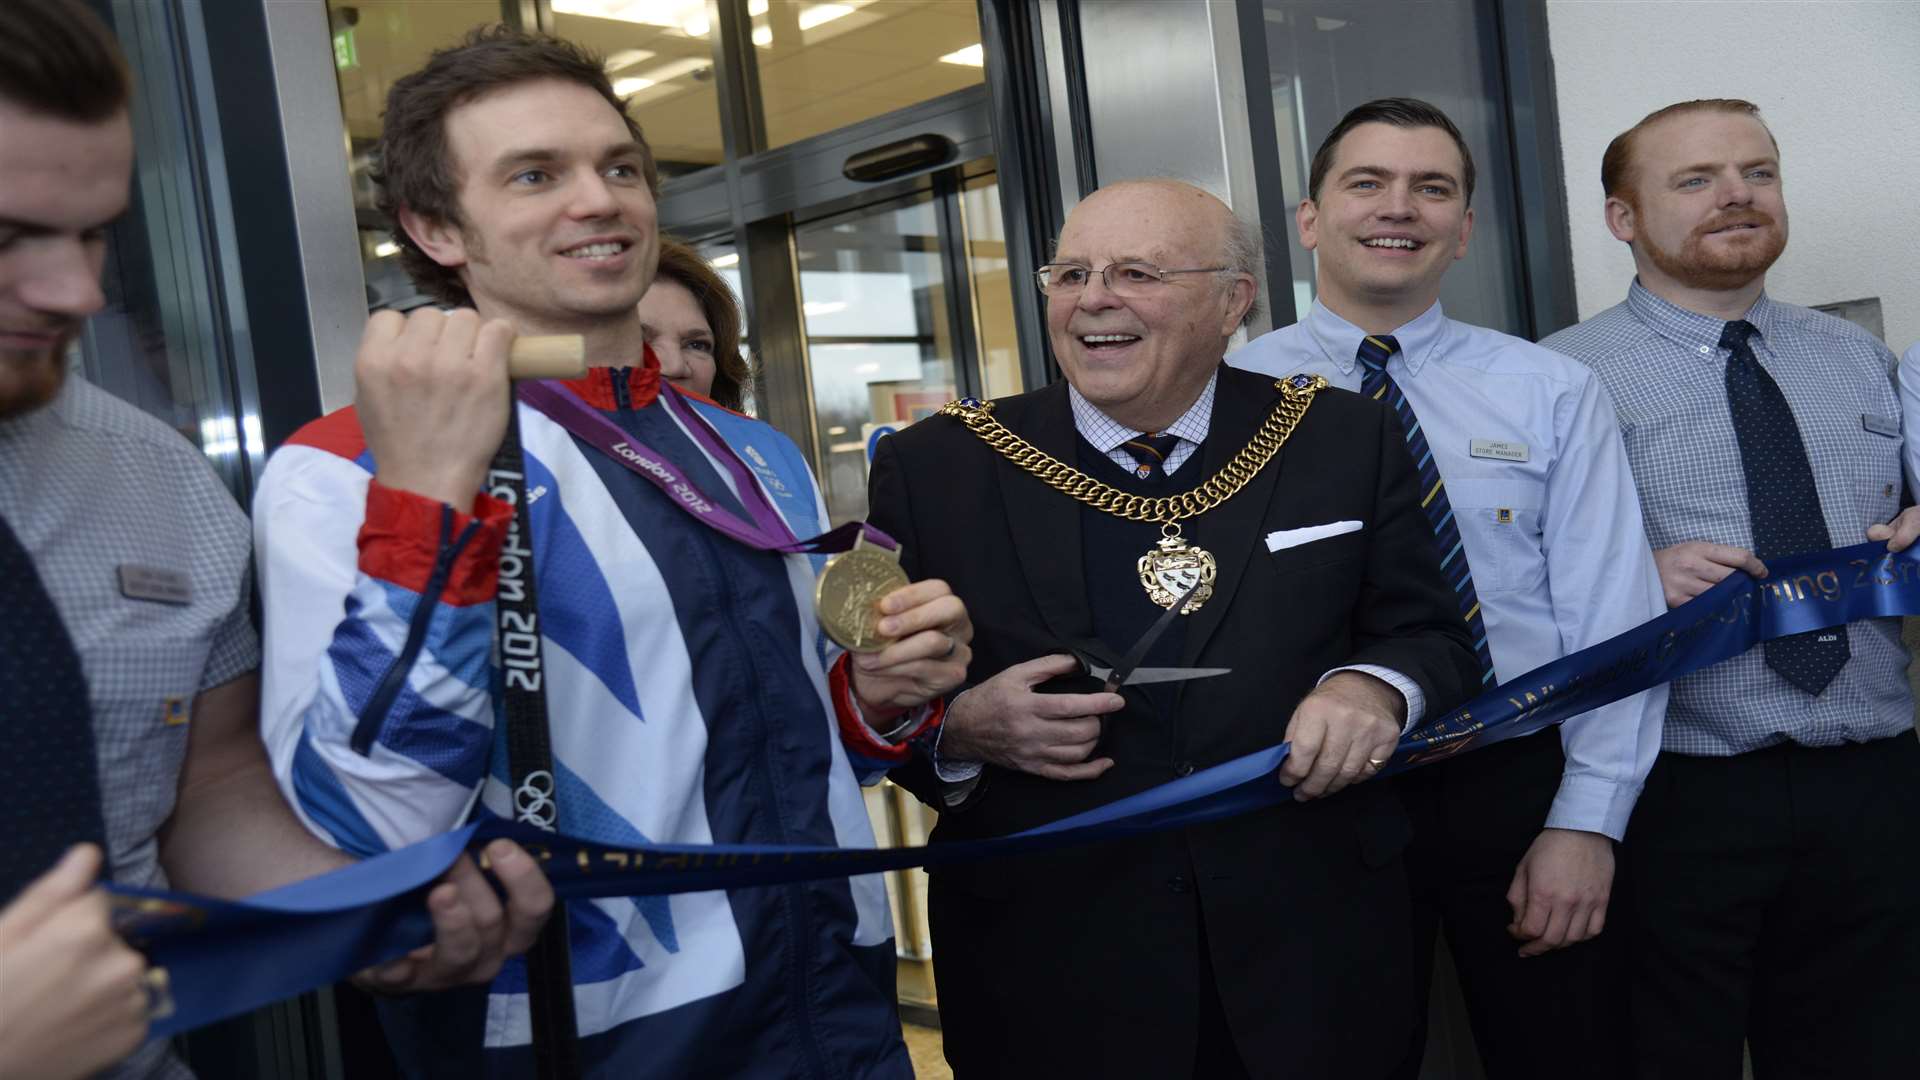 Olympic canoeist Tim Baillie and Lord Mayor Cllr George Metcalfe at the opening. Picture: Chris Davey